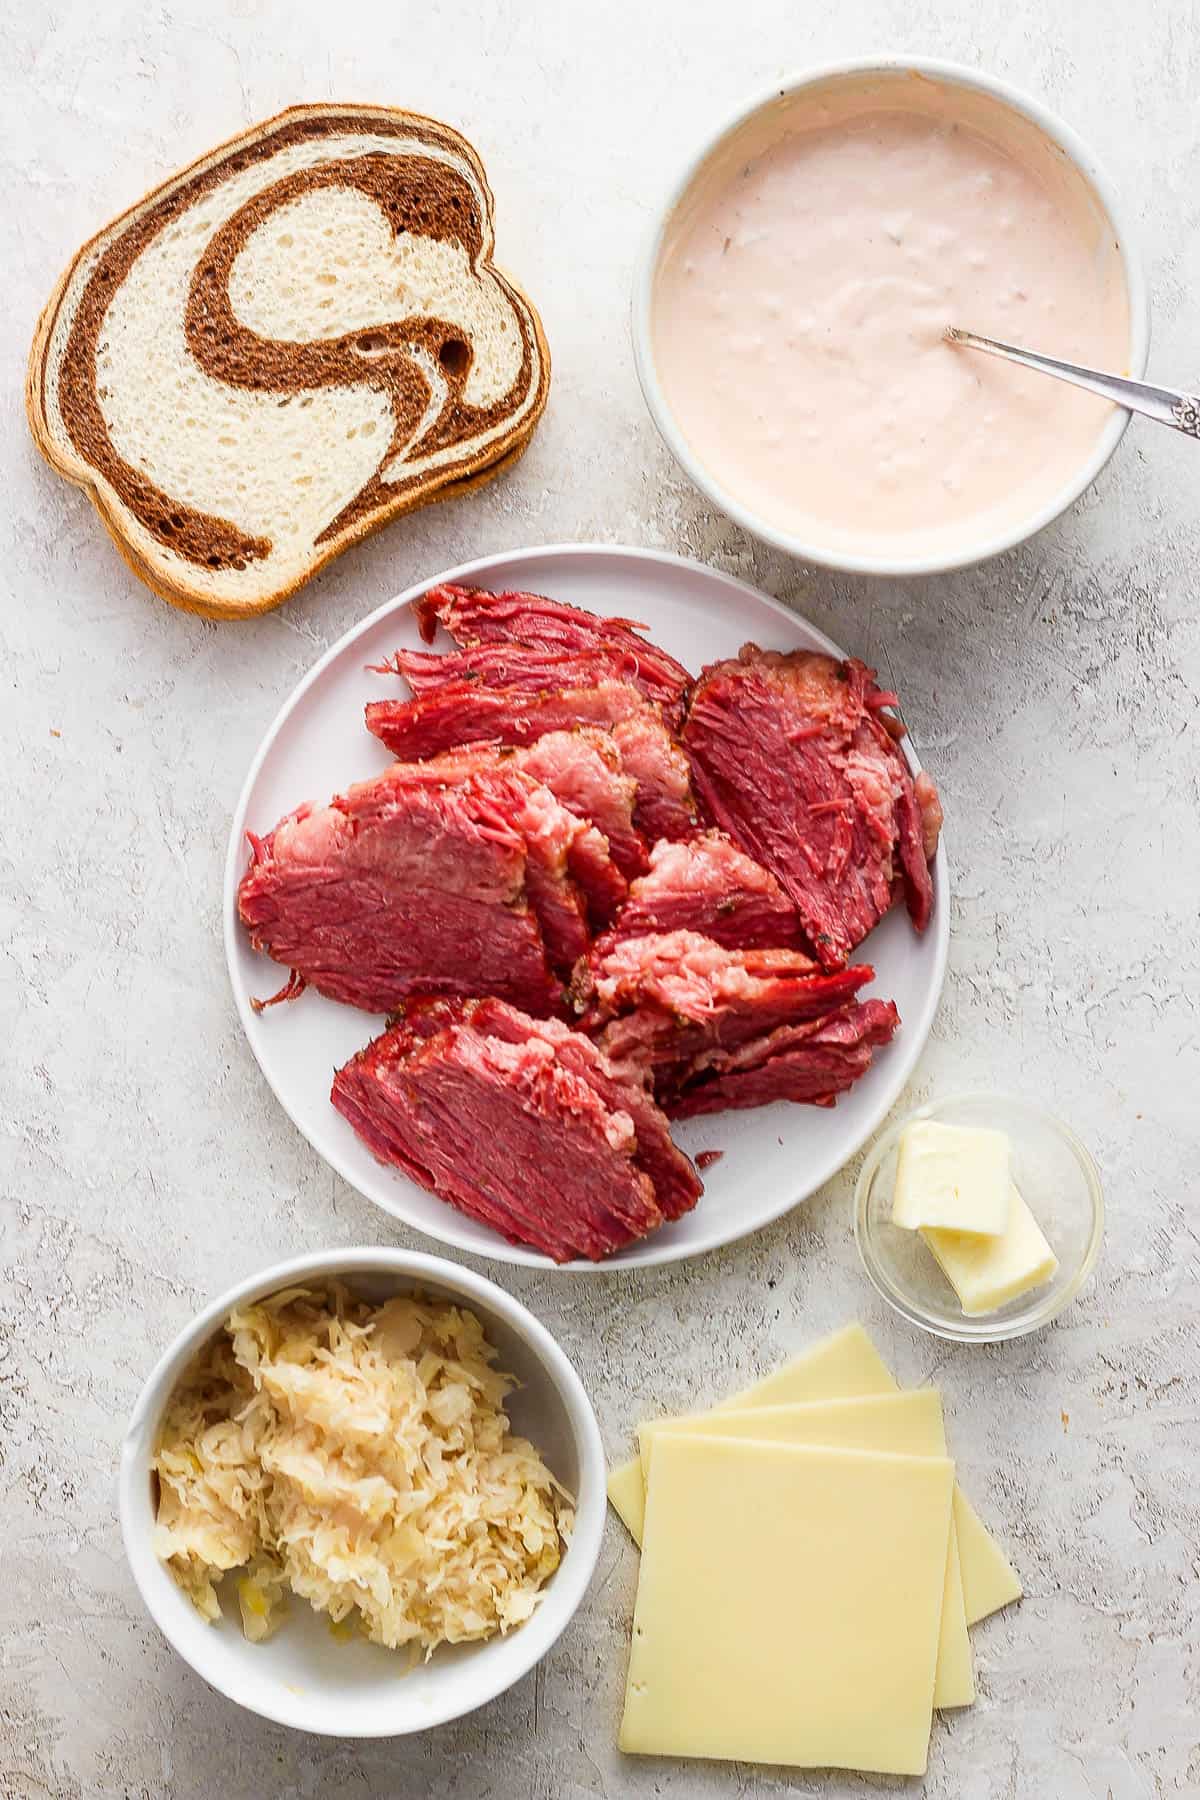 Two slices of rye bread, a bowl of thousand island dressing, a plate of corned beef, a bowl of butter, three slices of swiss cheese, and a bowl of saurkraut.